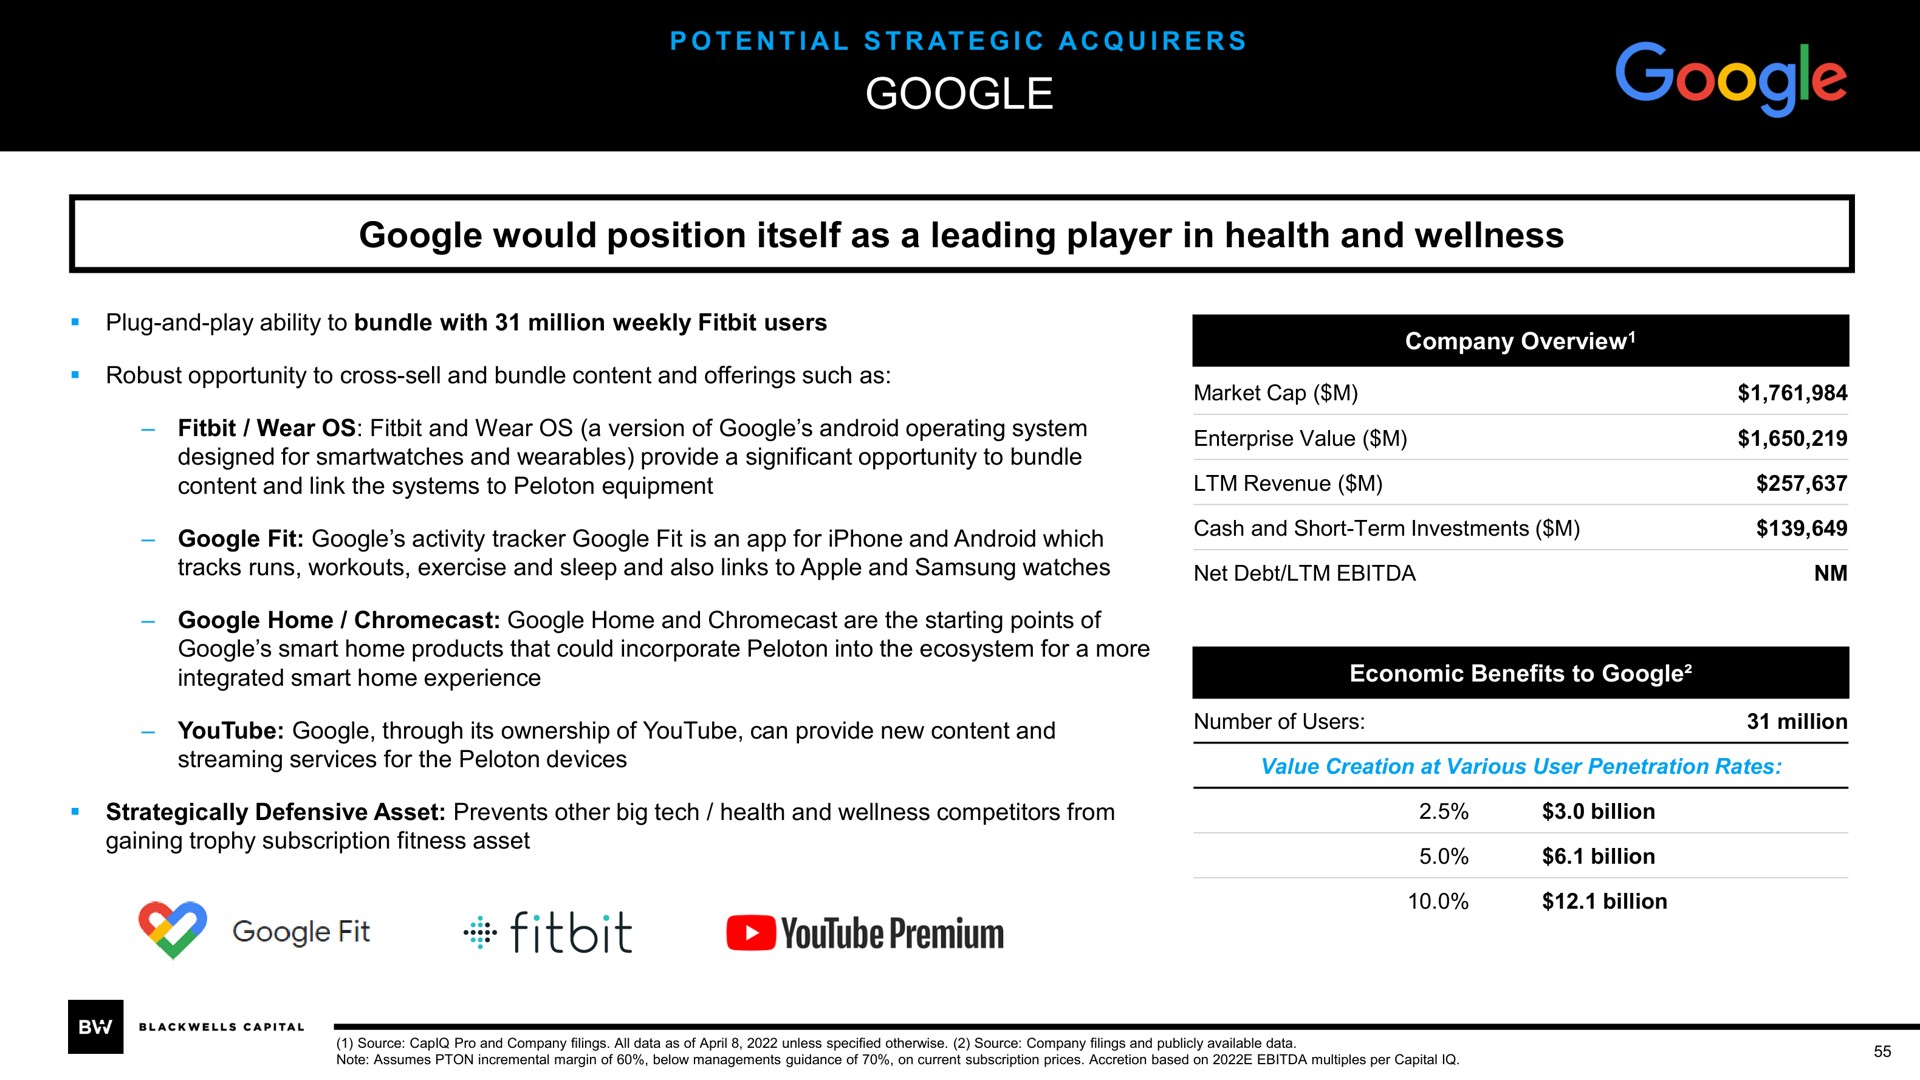 would position itself as a leading player in health and wellness fit premium | Blackwells Capital